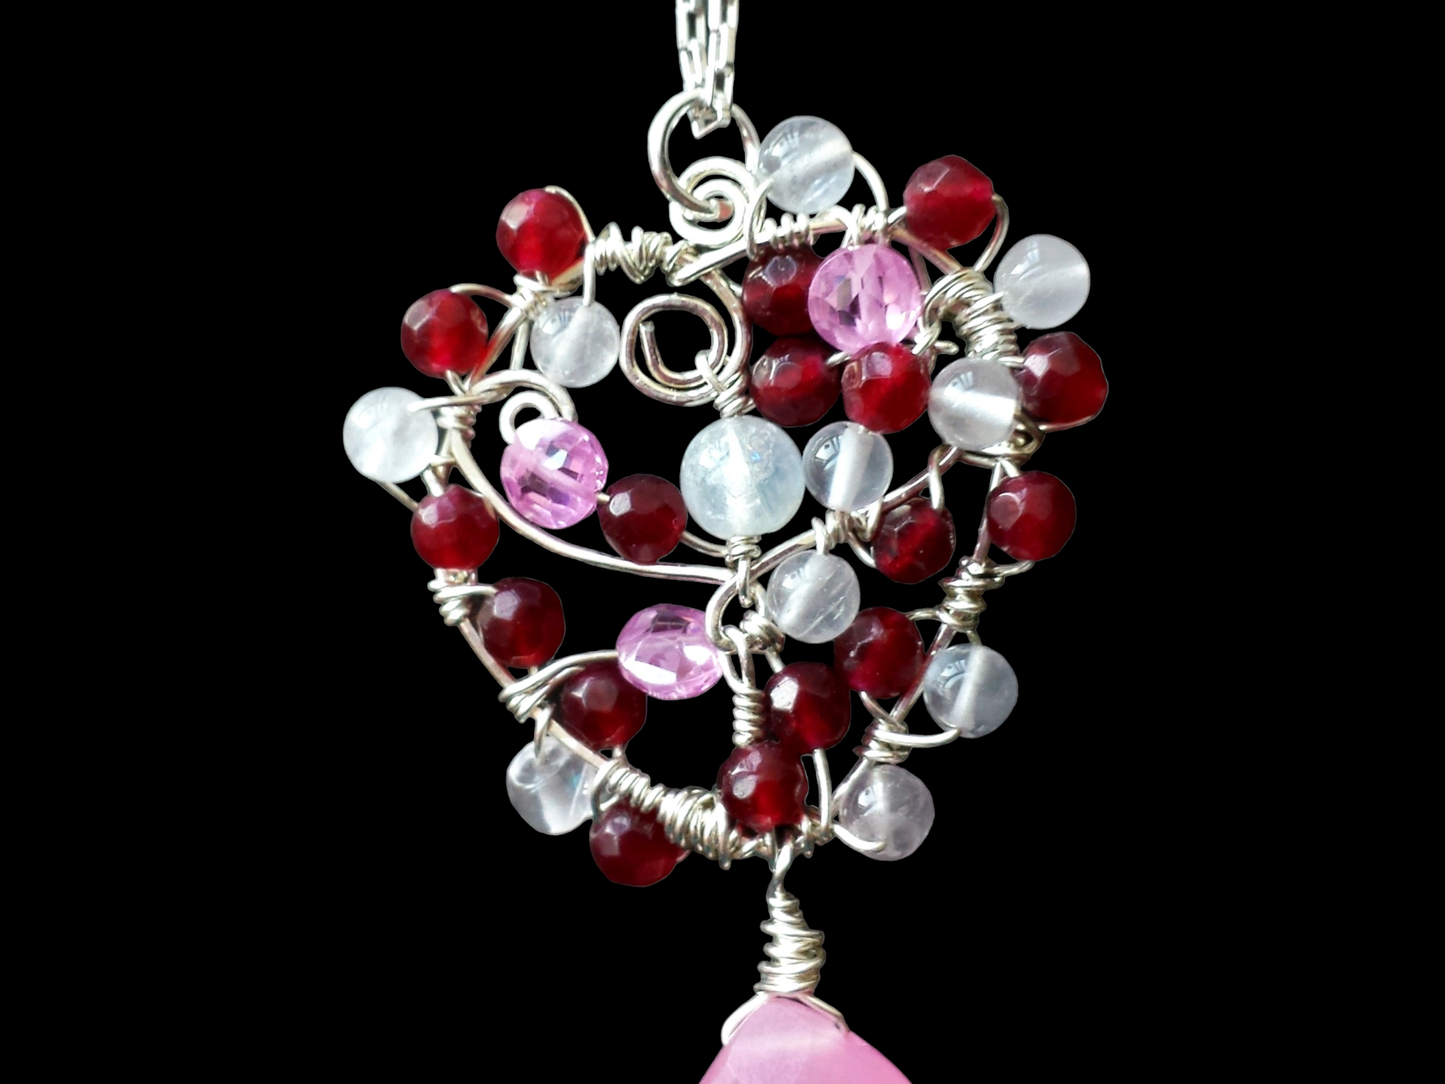 Heart of Gems Pendant Necklace, One of a Kind, Sterling Silver Multi Gemstone Wire Work Pendant, Reds & Pinks, Moonstone, Jade